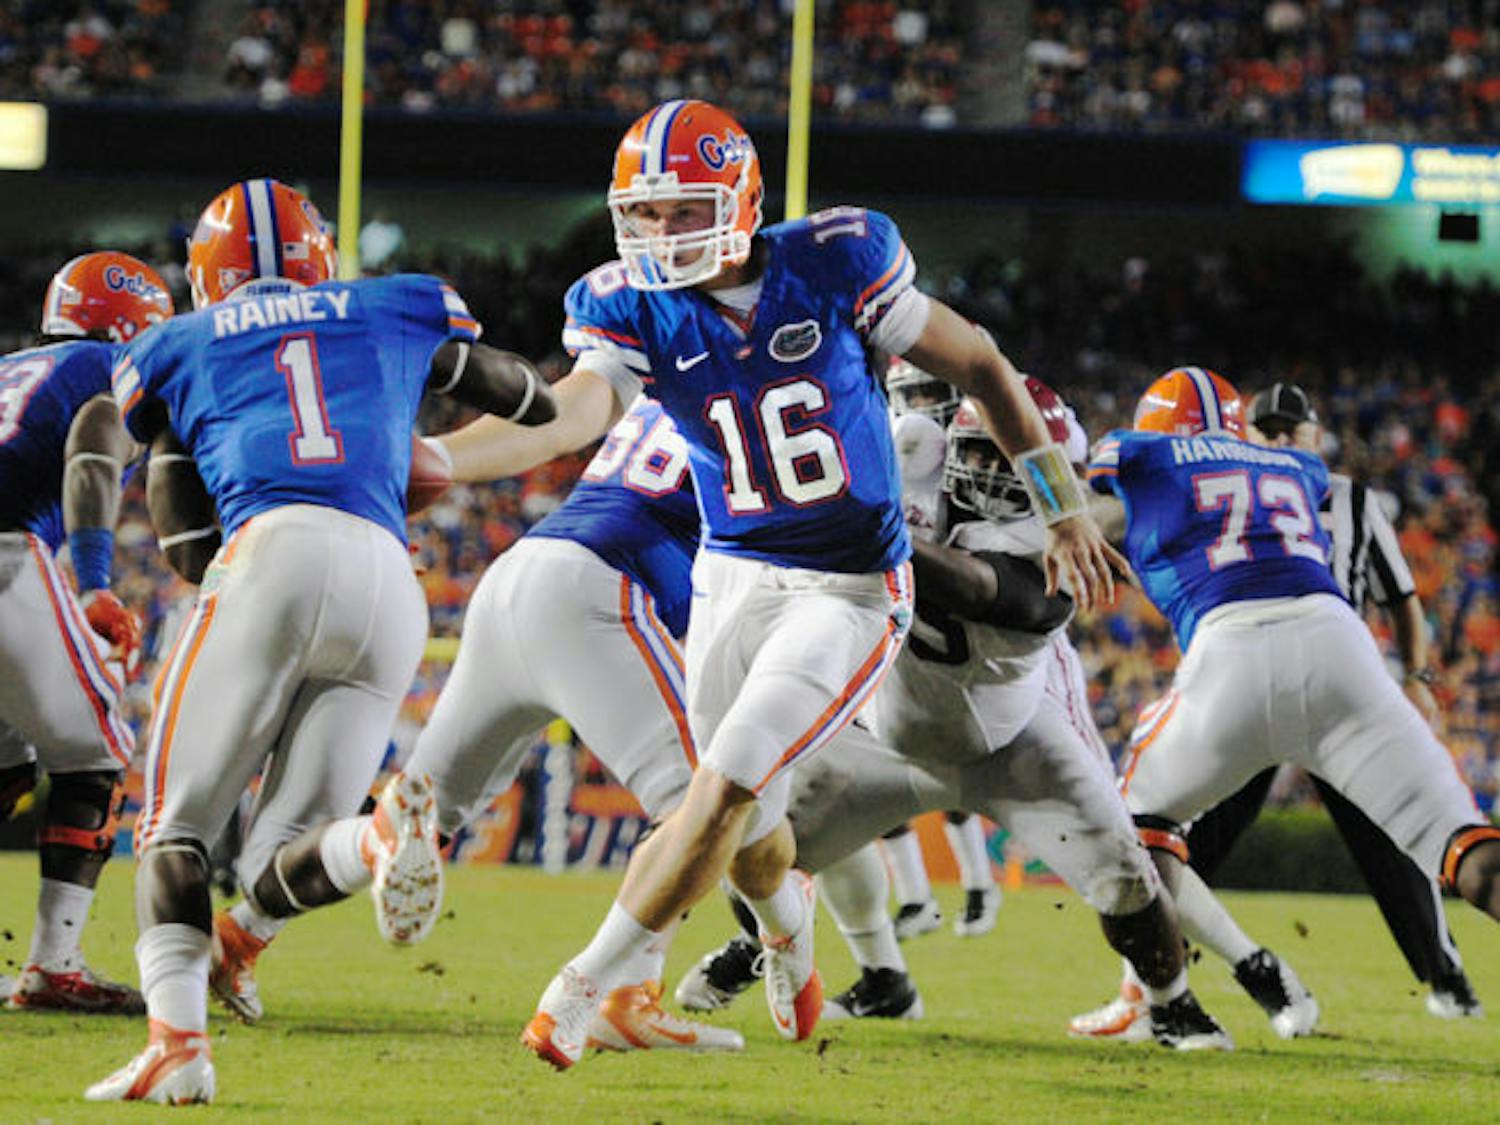 Quarterback Jeff Driskel hands off the ball to running back Chris Rainey during Florida’s 38-10 loss to Alabama in Ben Hill Griffin Stadium on Oct. 1, 2011.